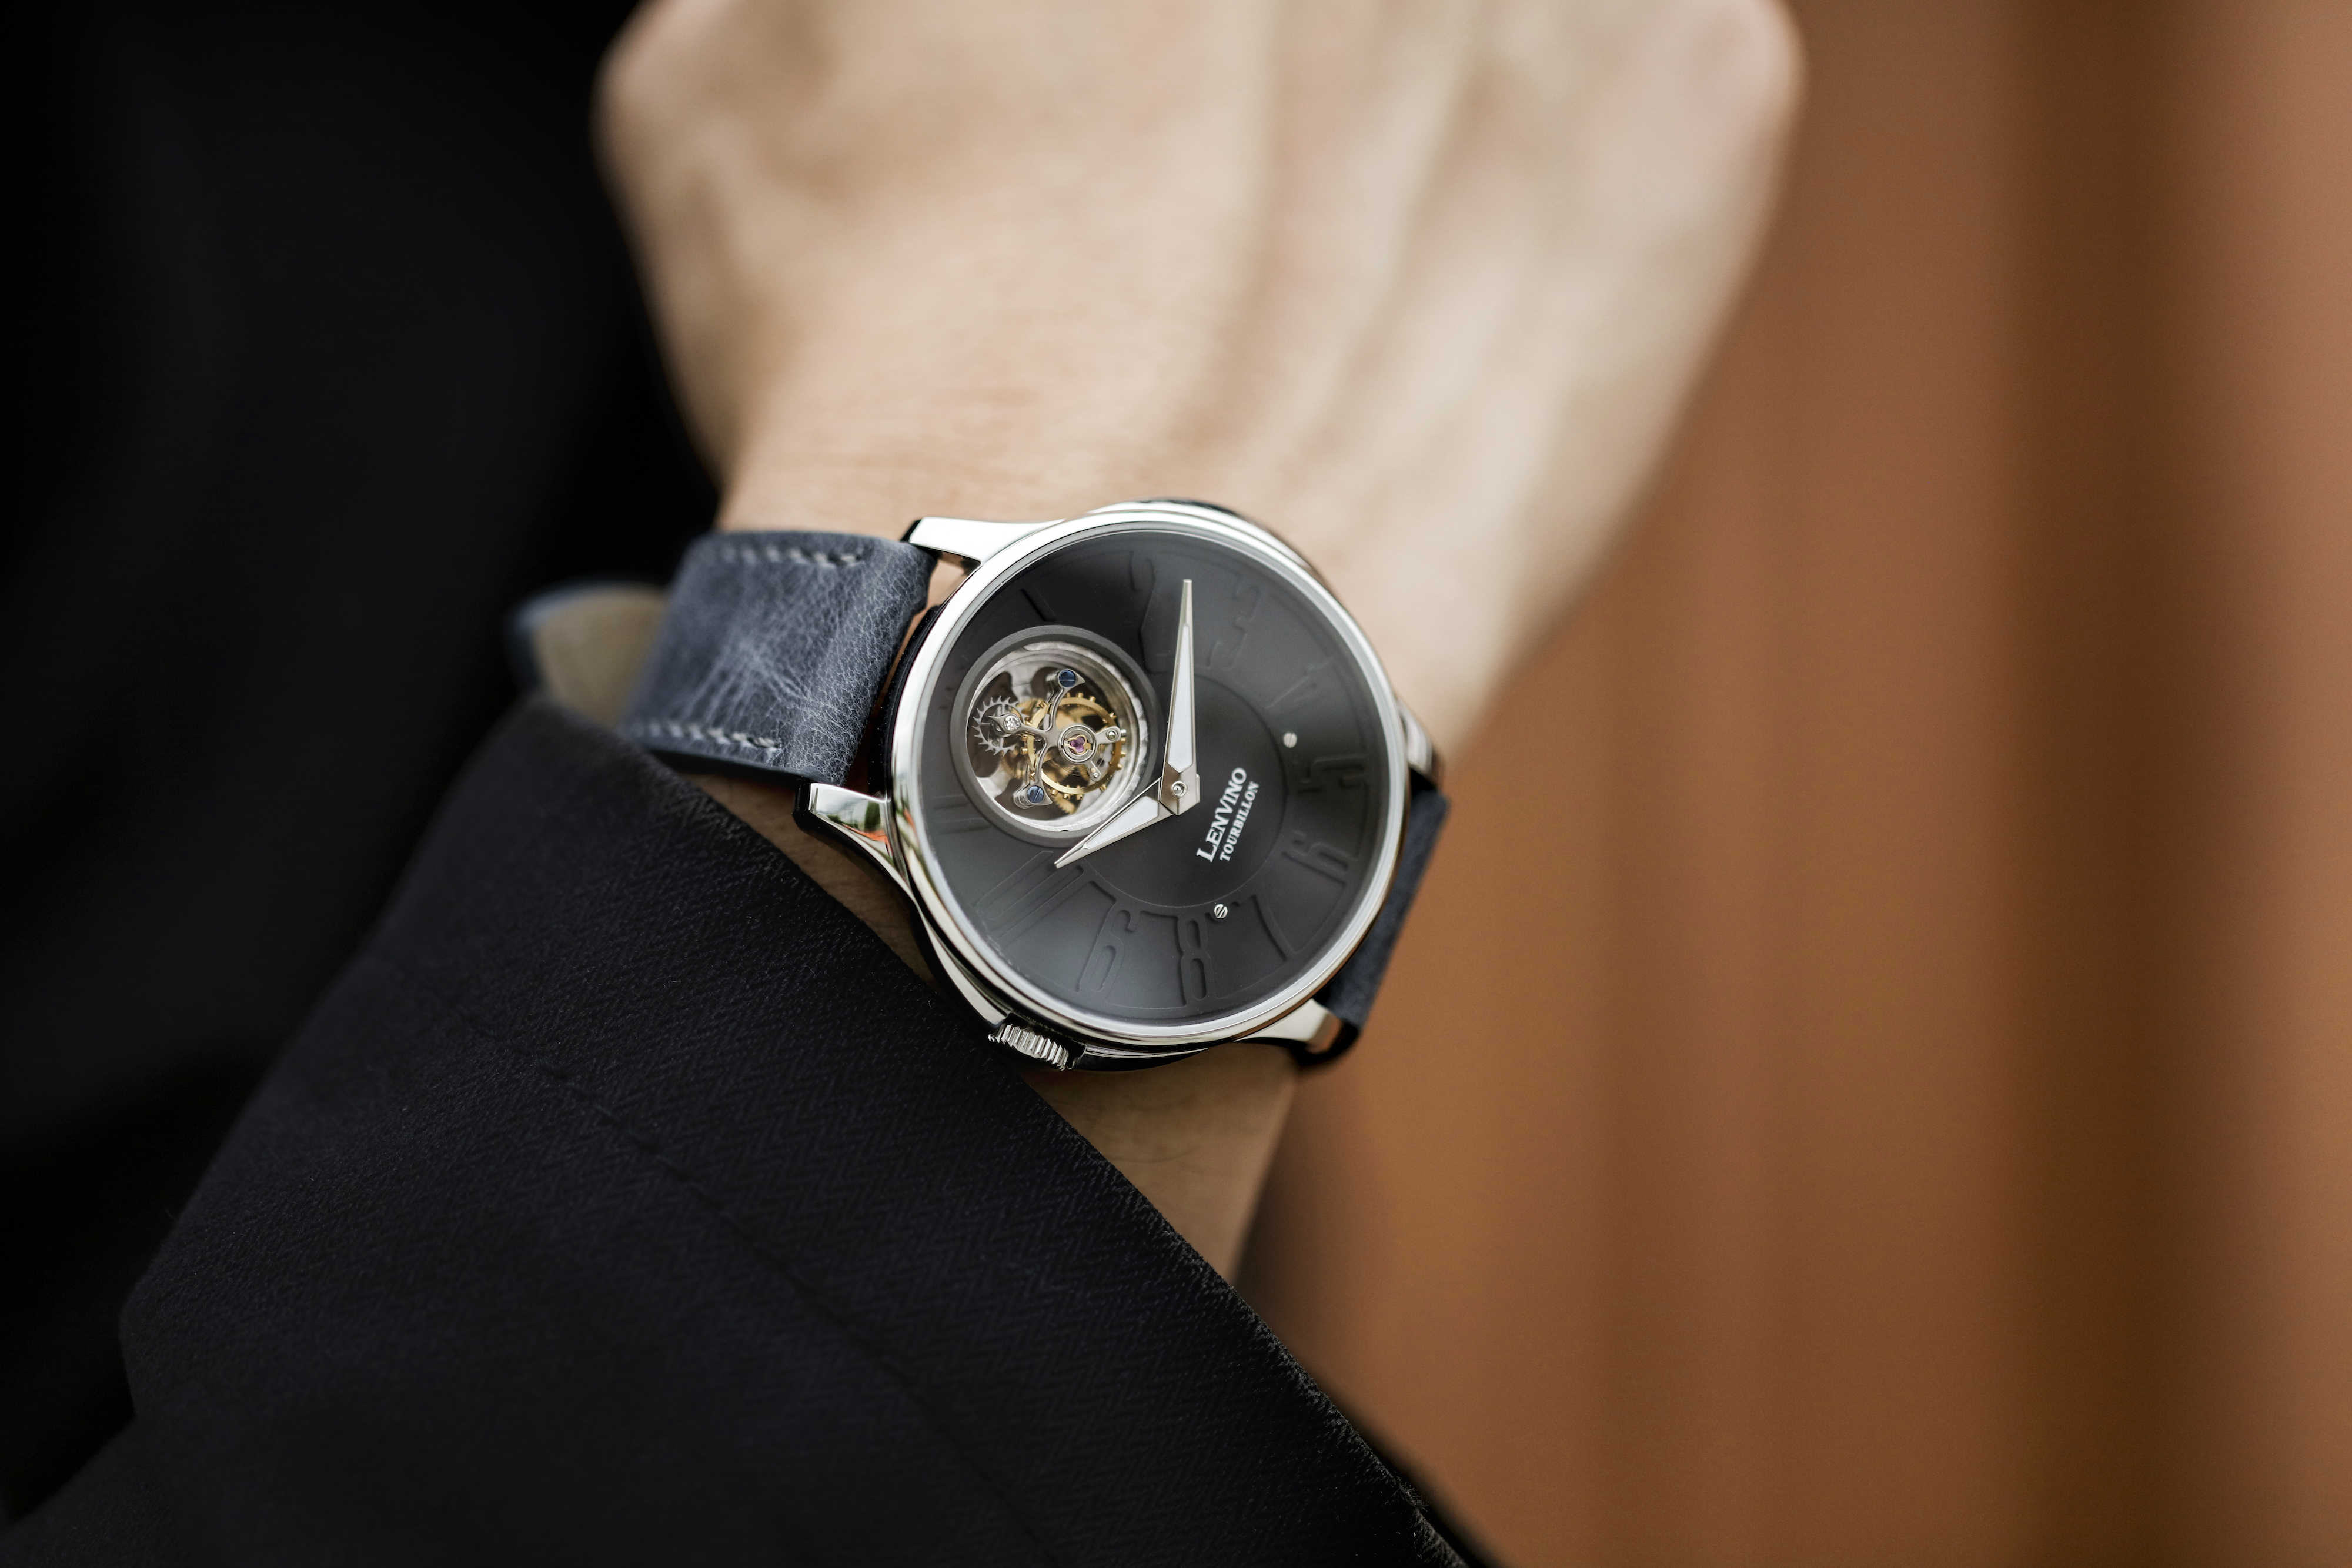 LENVINO Watch Co. Returns with a Flying Tourbillon Wristwatch for Only $499